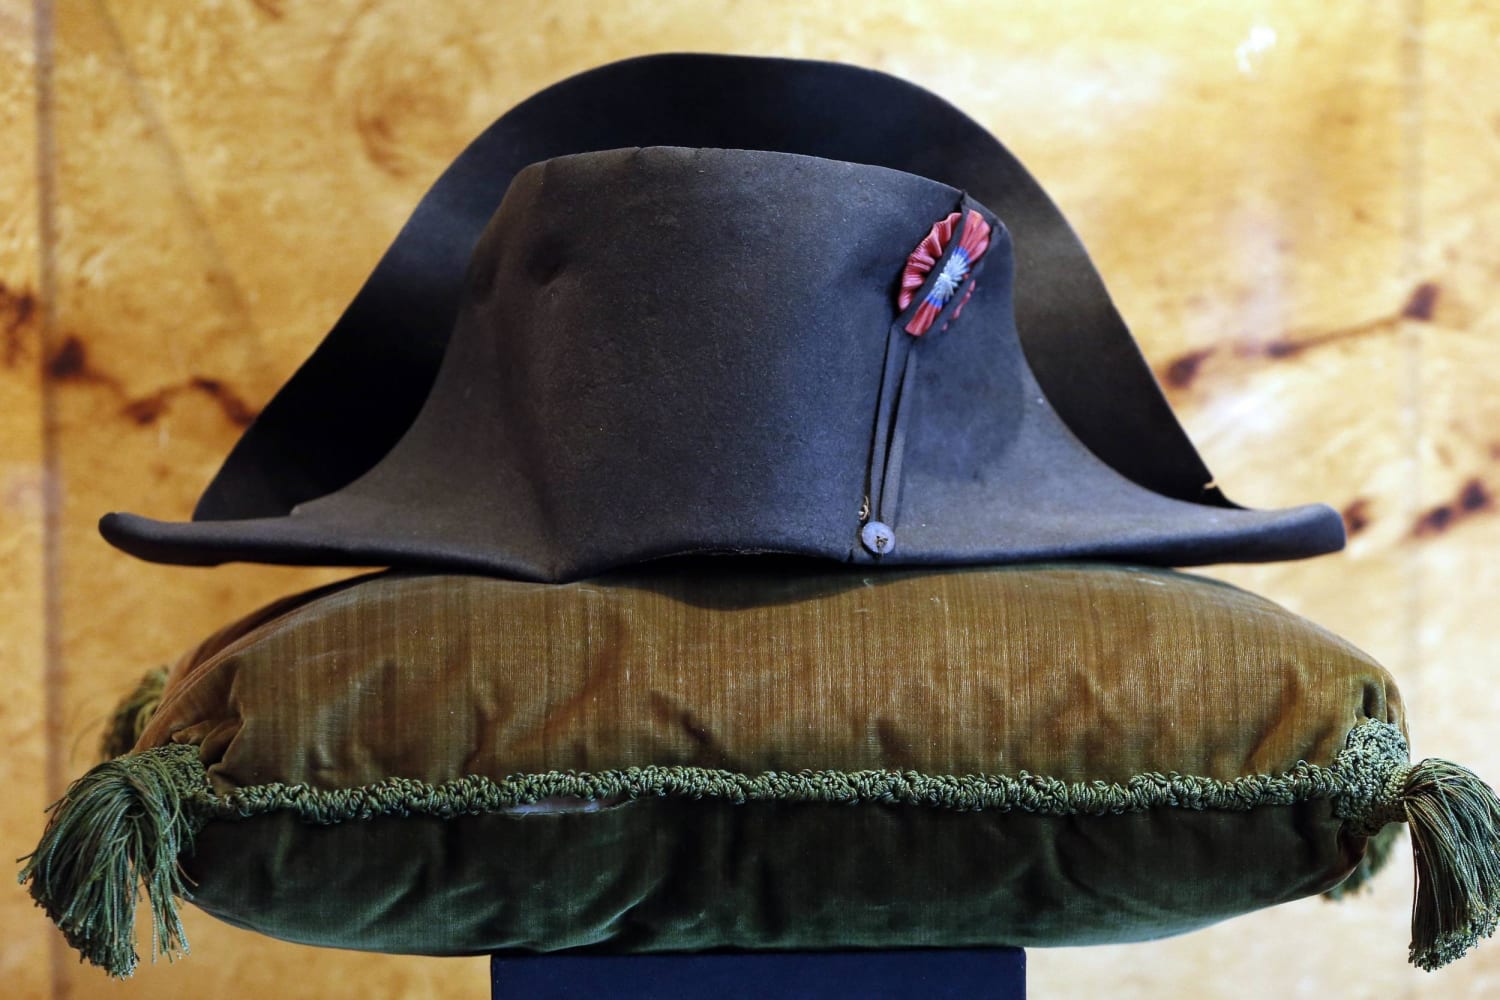 Napoleon&amp;#39;s Hat Auctioned to South Korean for $2.4 Million - NBC News